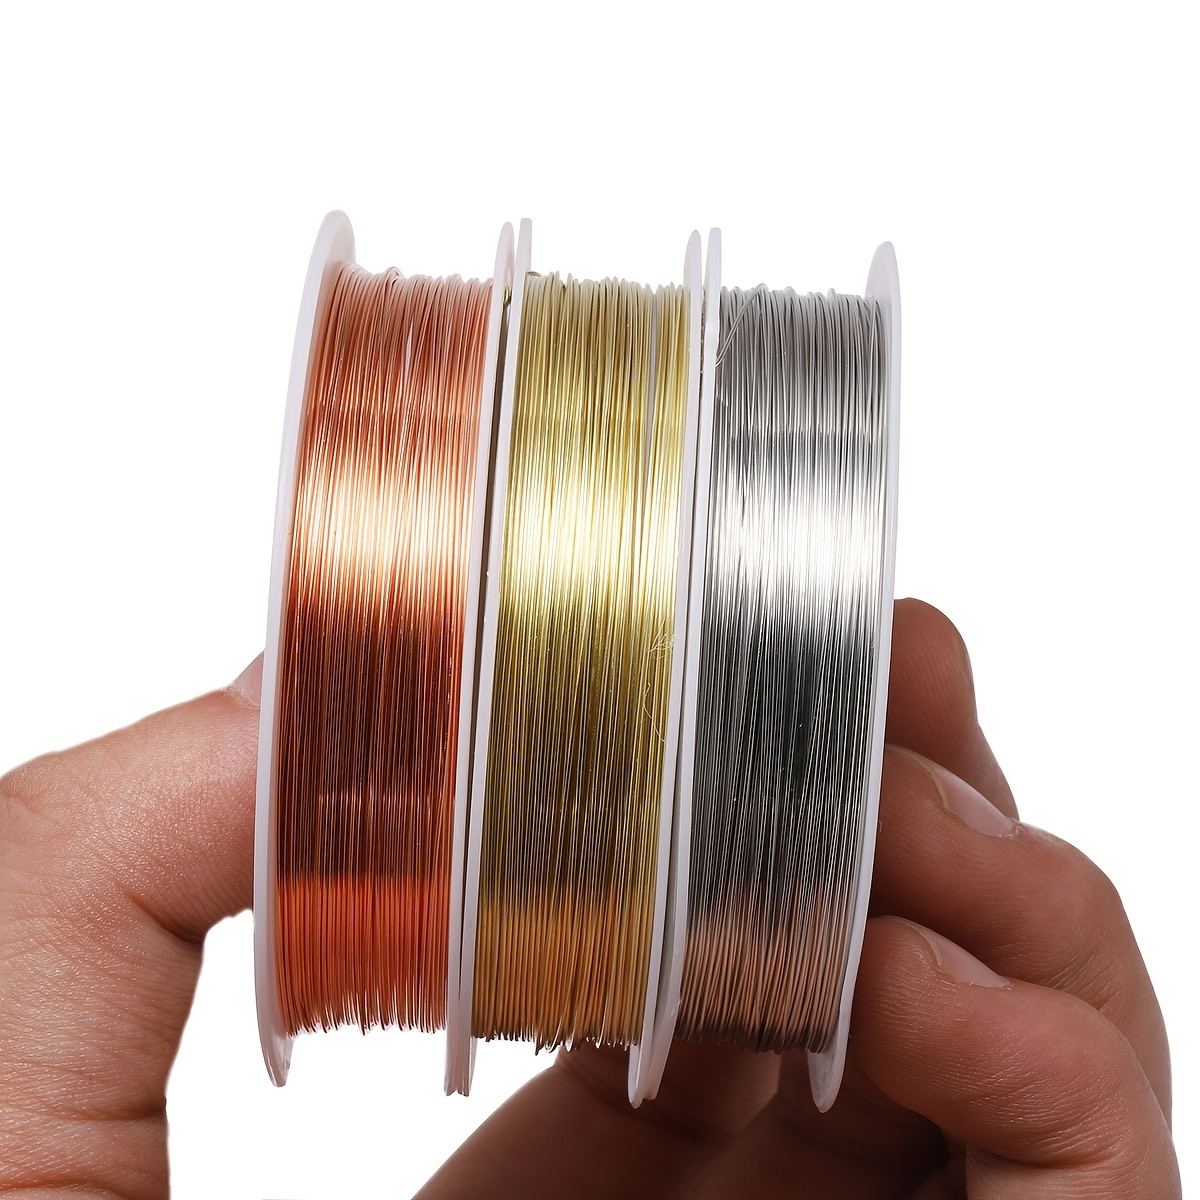 Rolled Copper Wire Supply Jewelry Making St Cord 10m - 0.5MM 